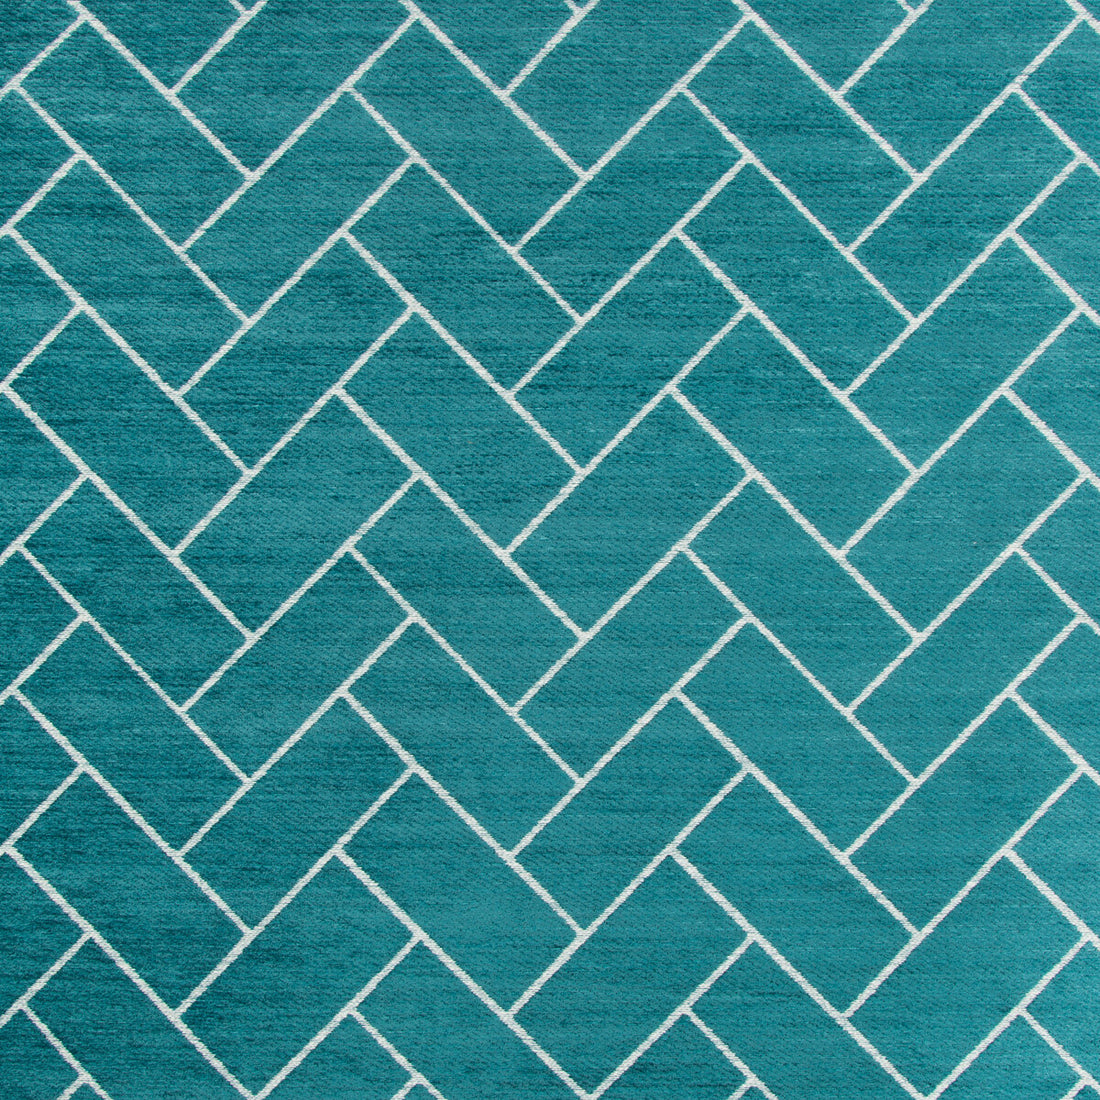 Kravet Contract fabric in 35013-13 color - pattern 35013.13.0 - by Kravet Contract in the Incase Crypton Gis collection